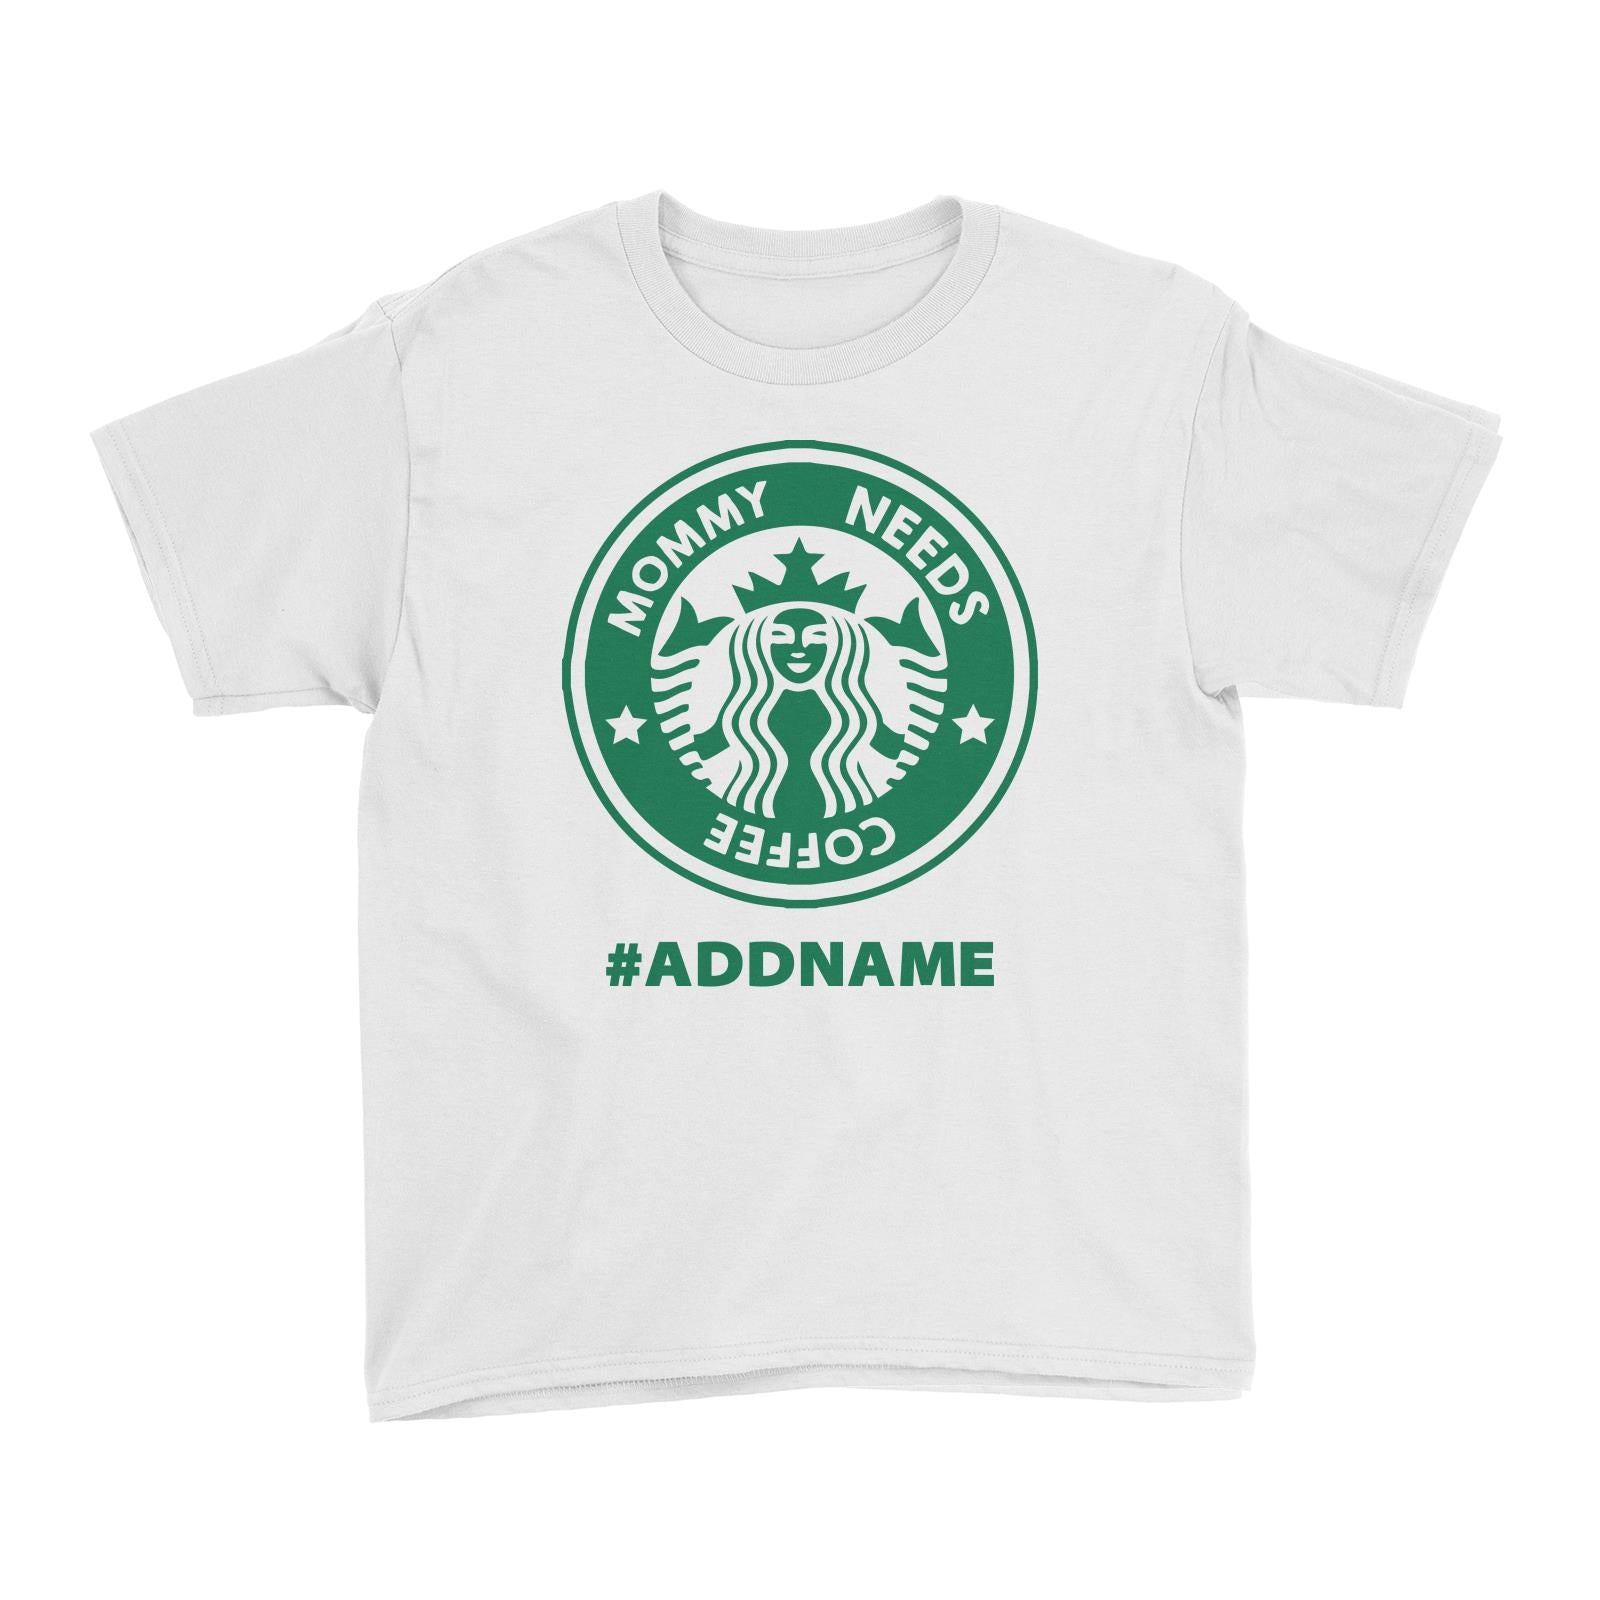 Mommy Needs Coffee White Kid's T-Shirt